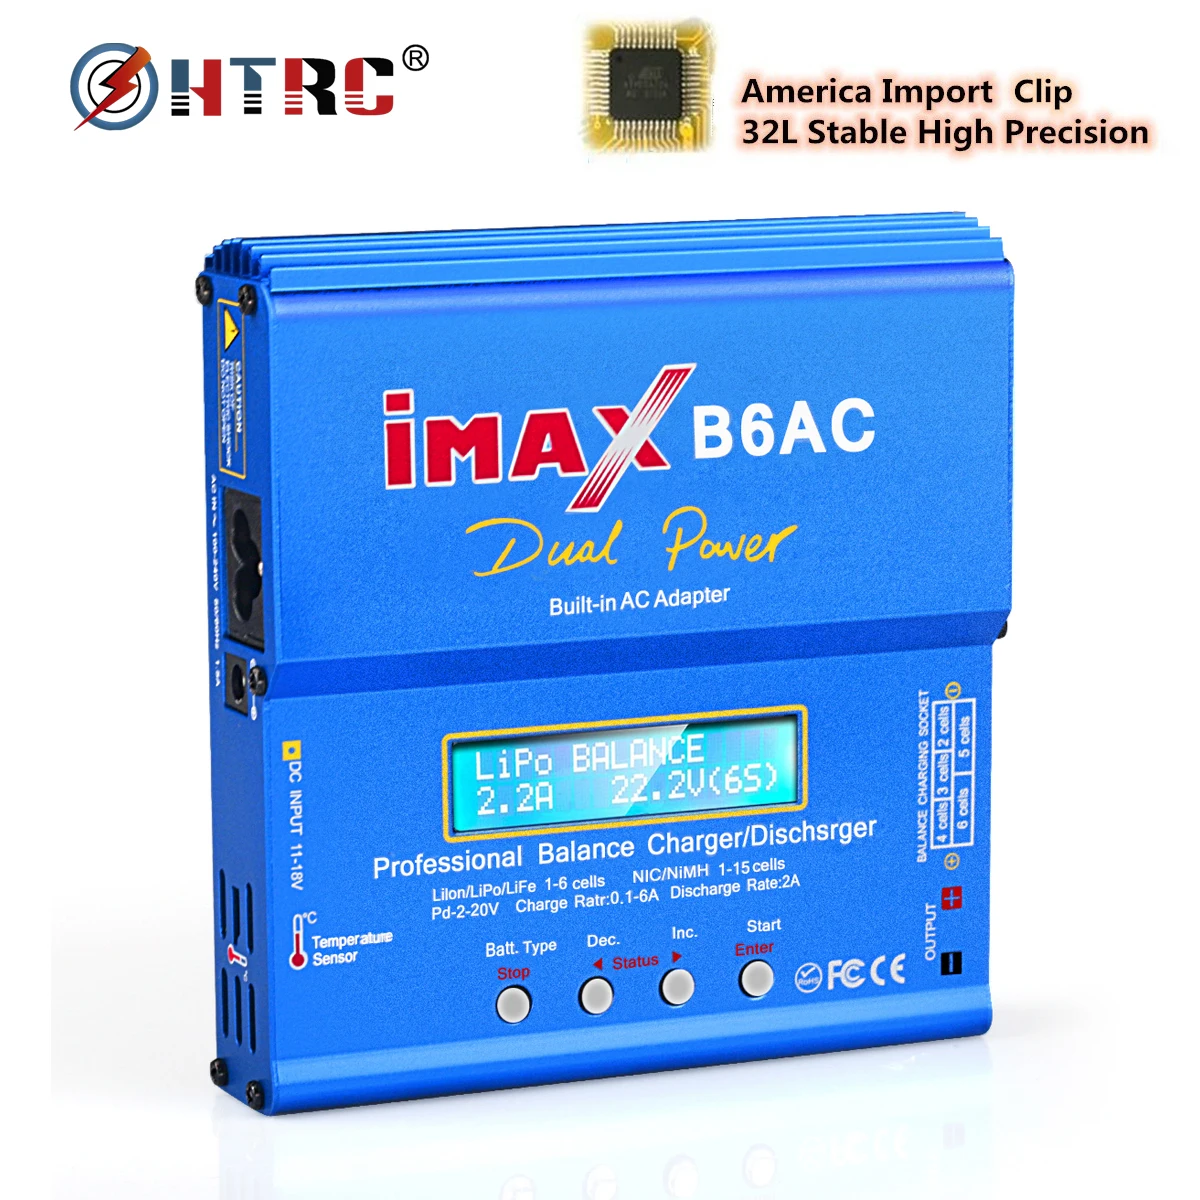 iMAX B6 AC AC/DC Balance charging Support 5 lithium NiMH Battery Data Charge UK 